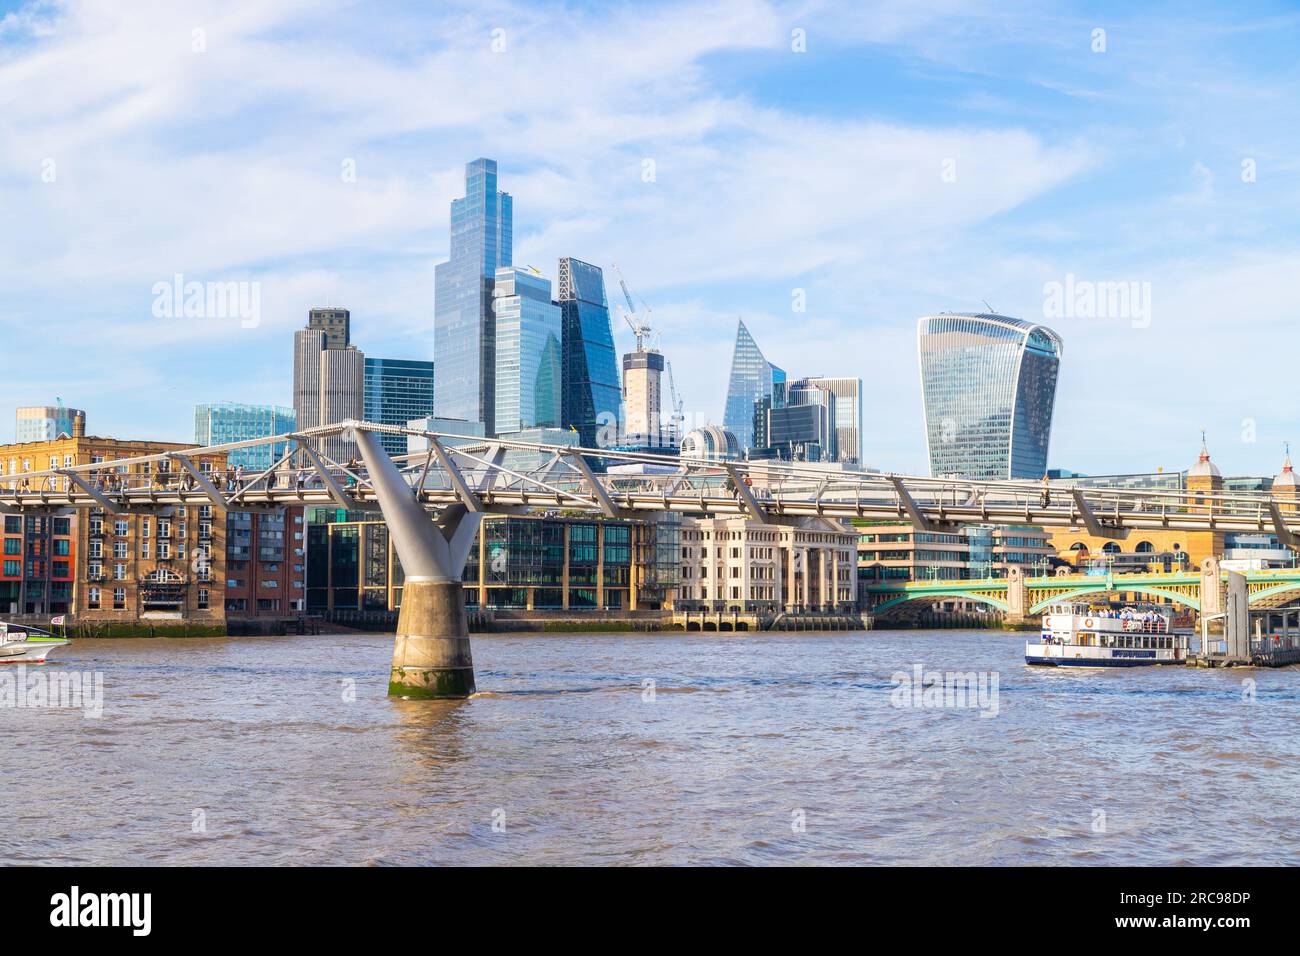 LONDON, UK - 6TH JULY 2023: The Millennium Bridge and City of London skyline during the day. People can be seen on a boat and the bridge. Stock Photo